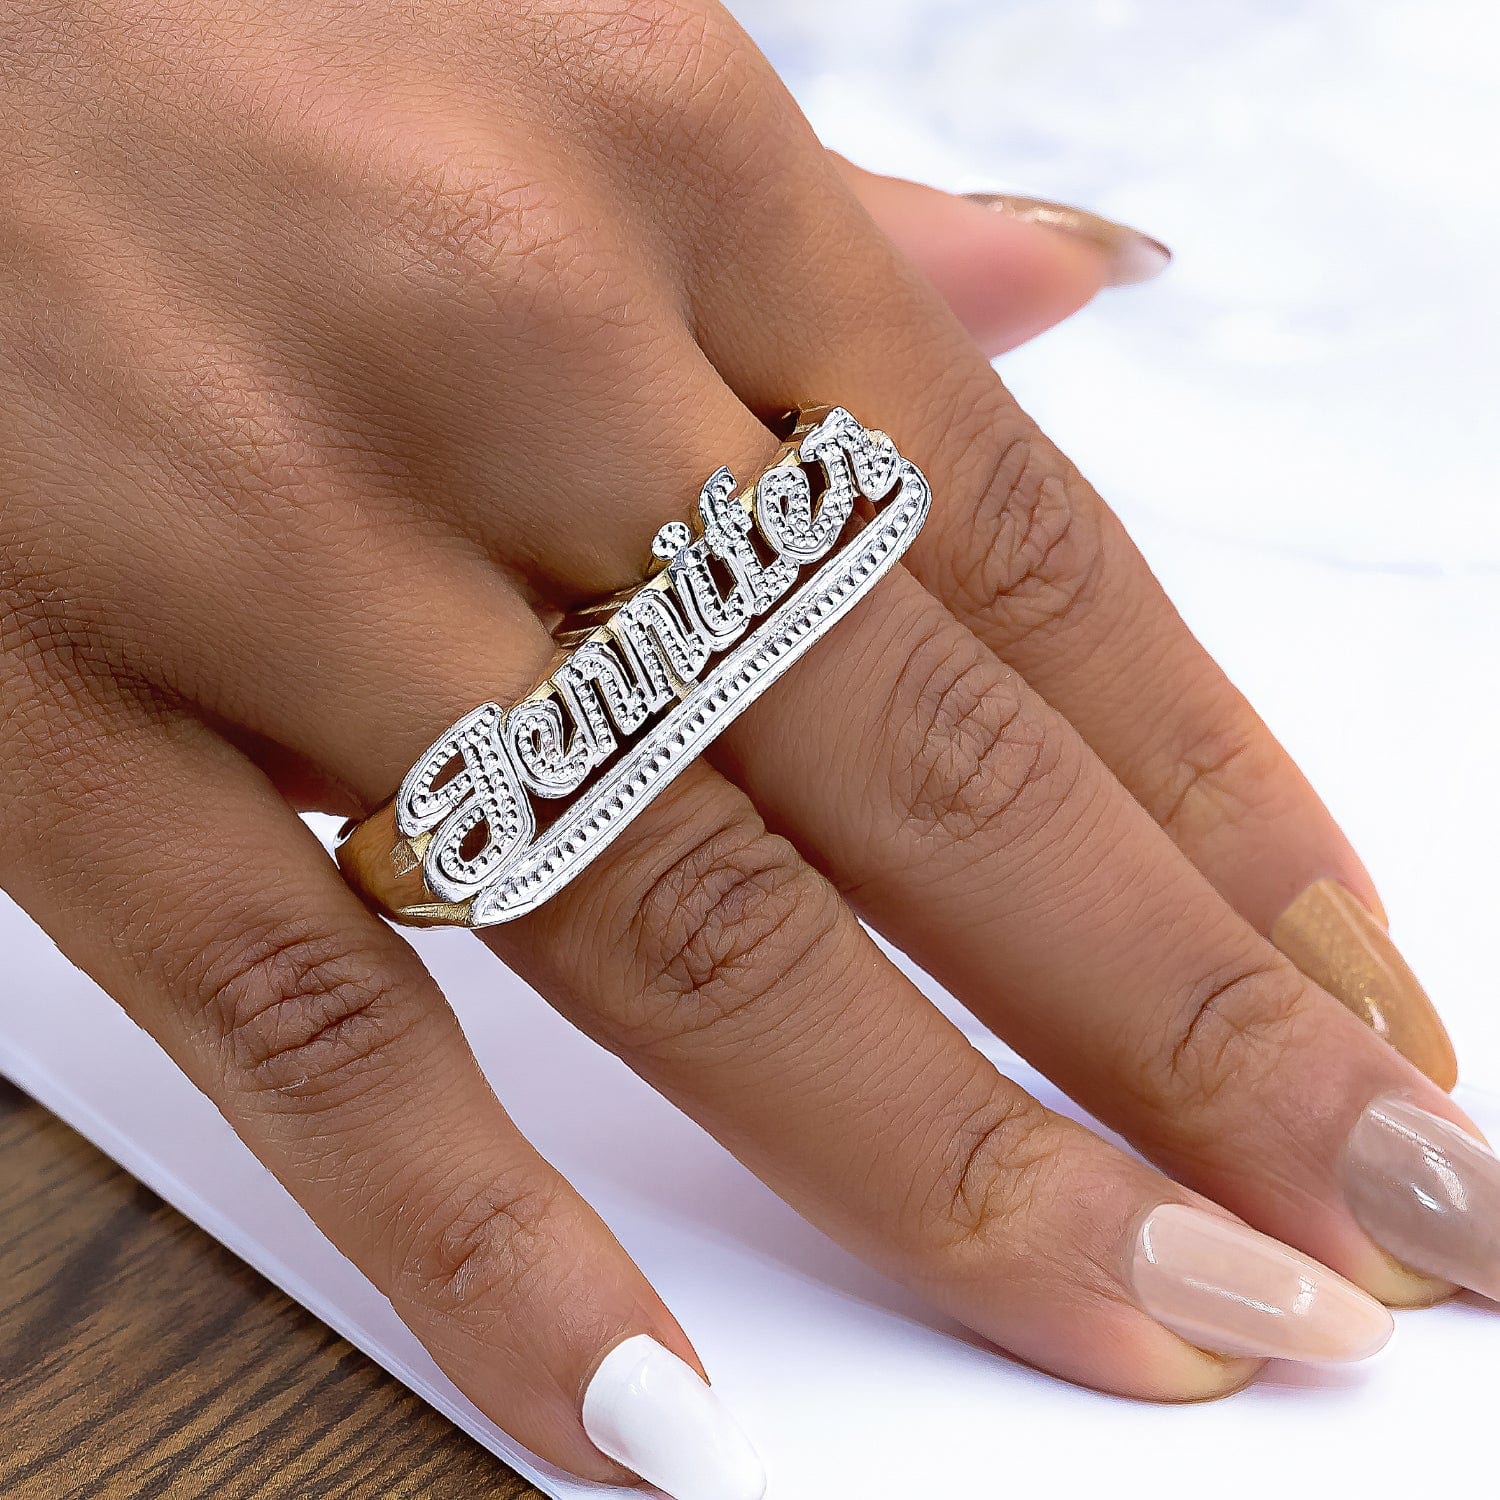 Personalized Two Finger Name Ring w/ Beading